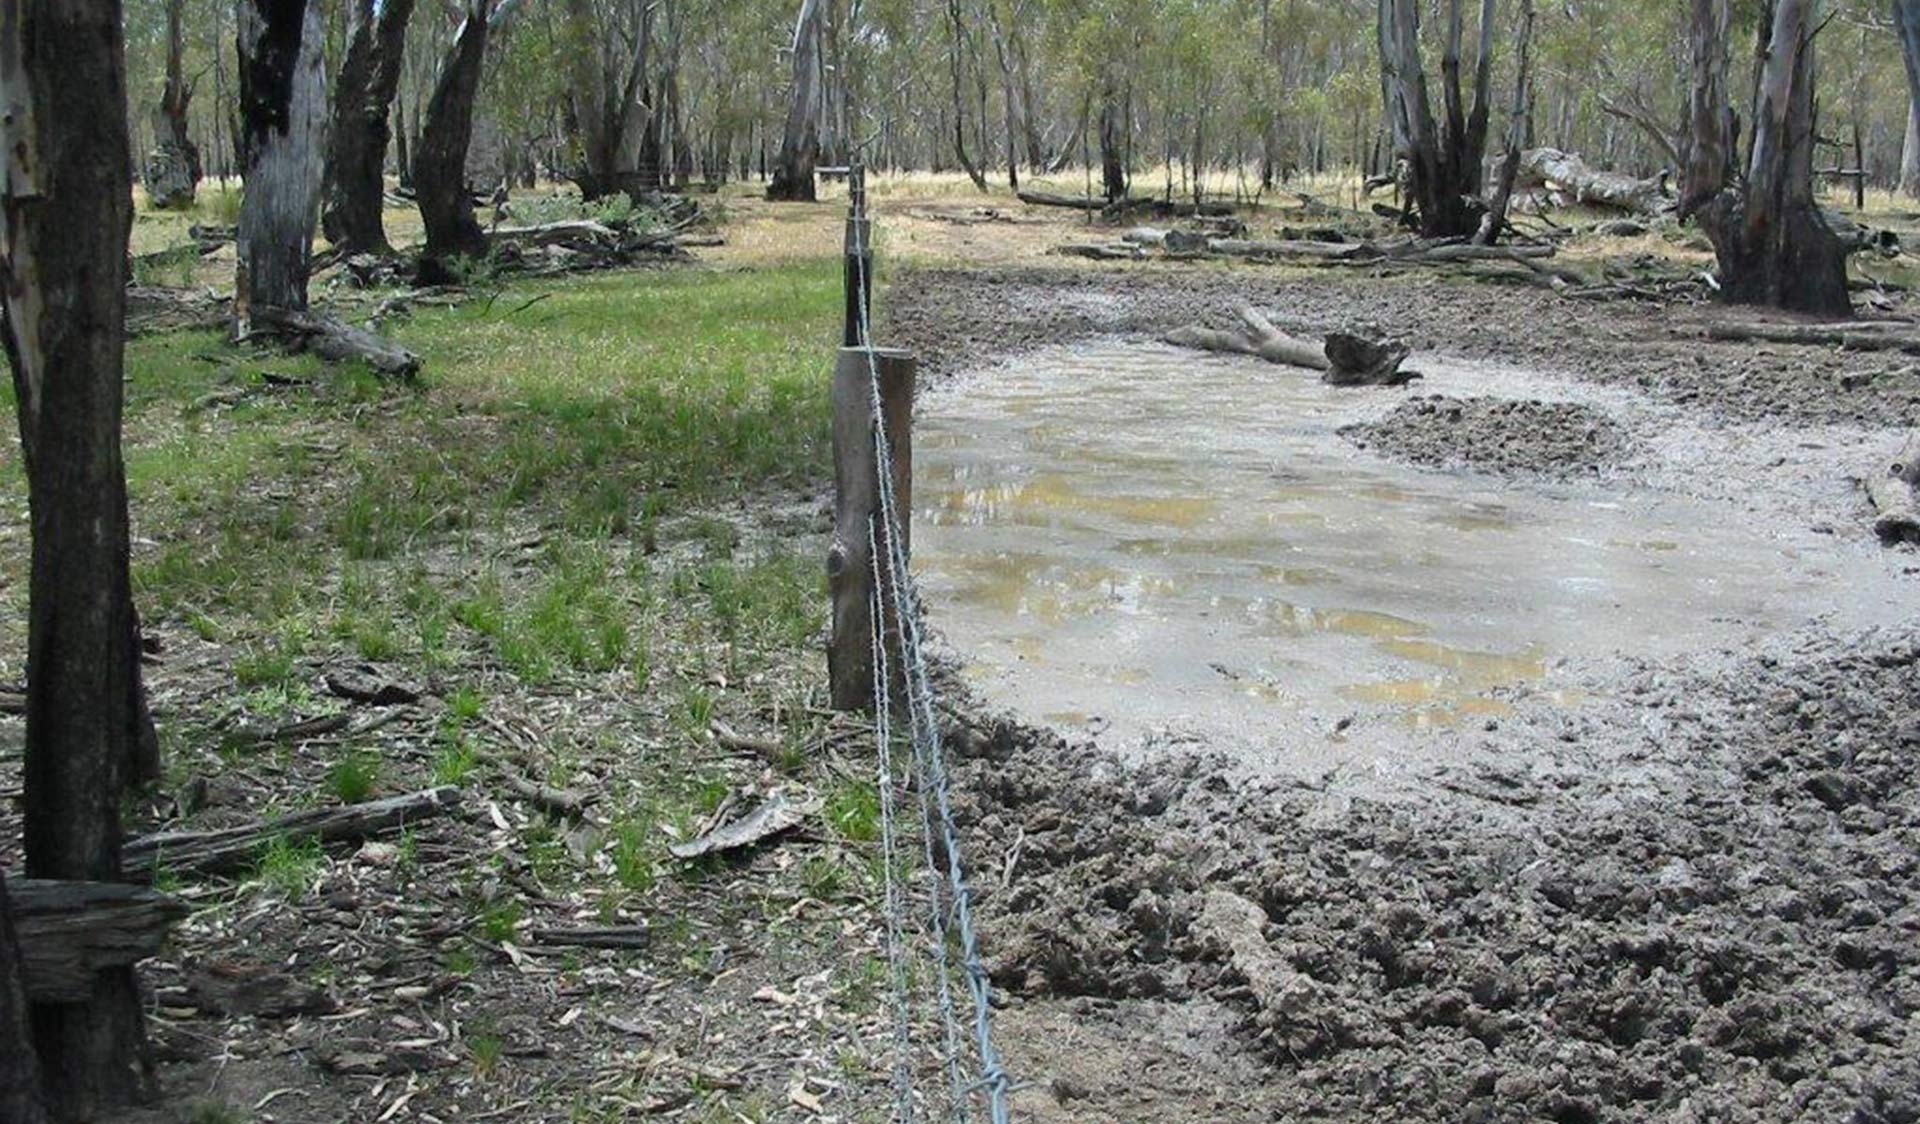 Exclusion fence trial in Barmah National Park showing intact vegetation inside fence and feral horse damage outside fence